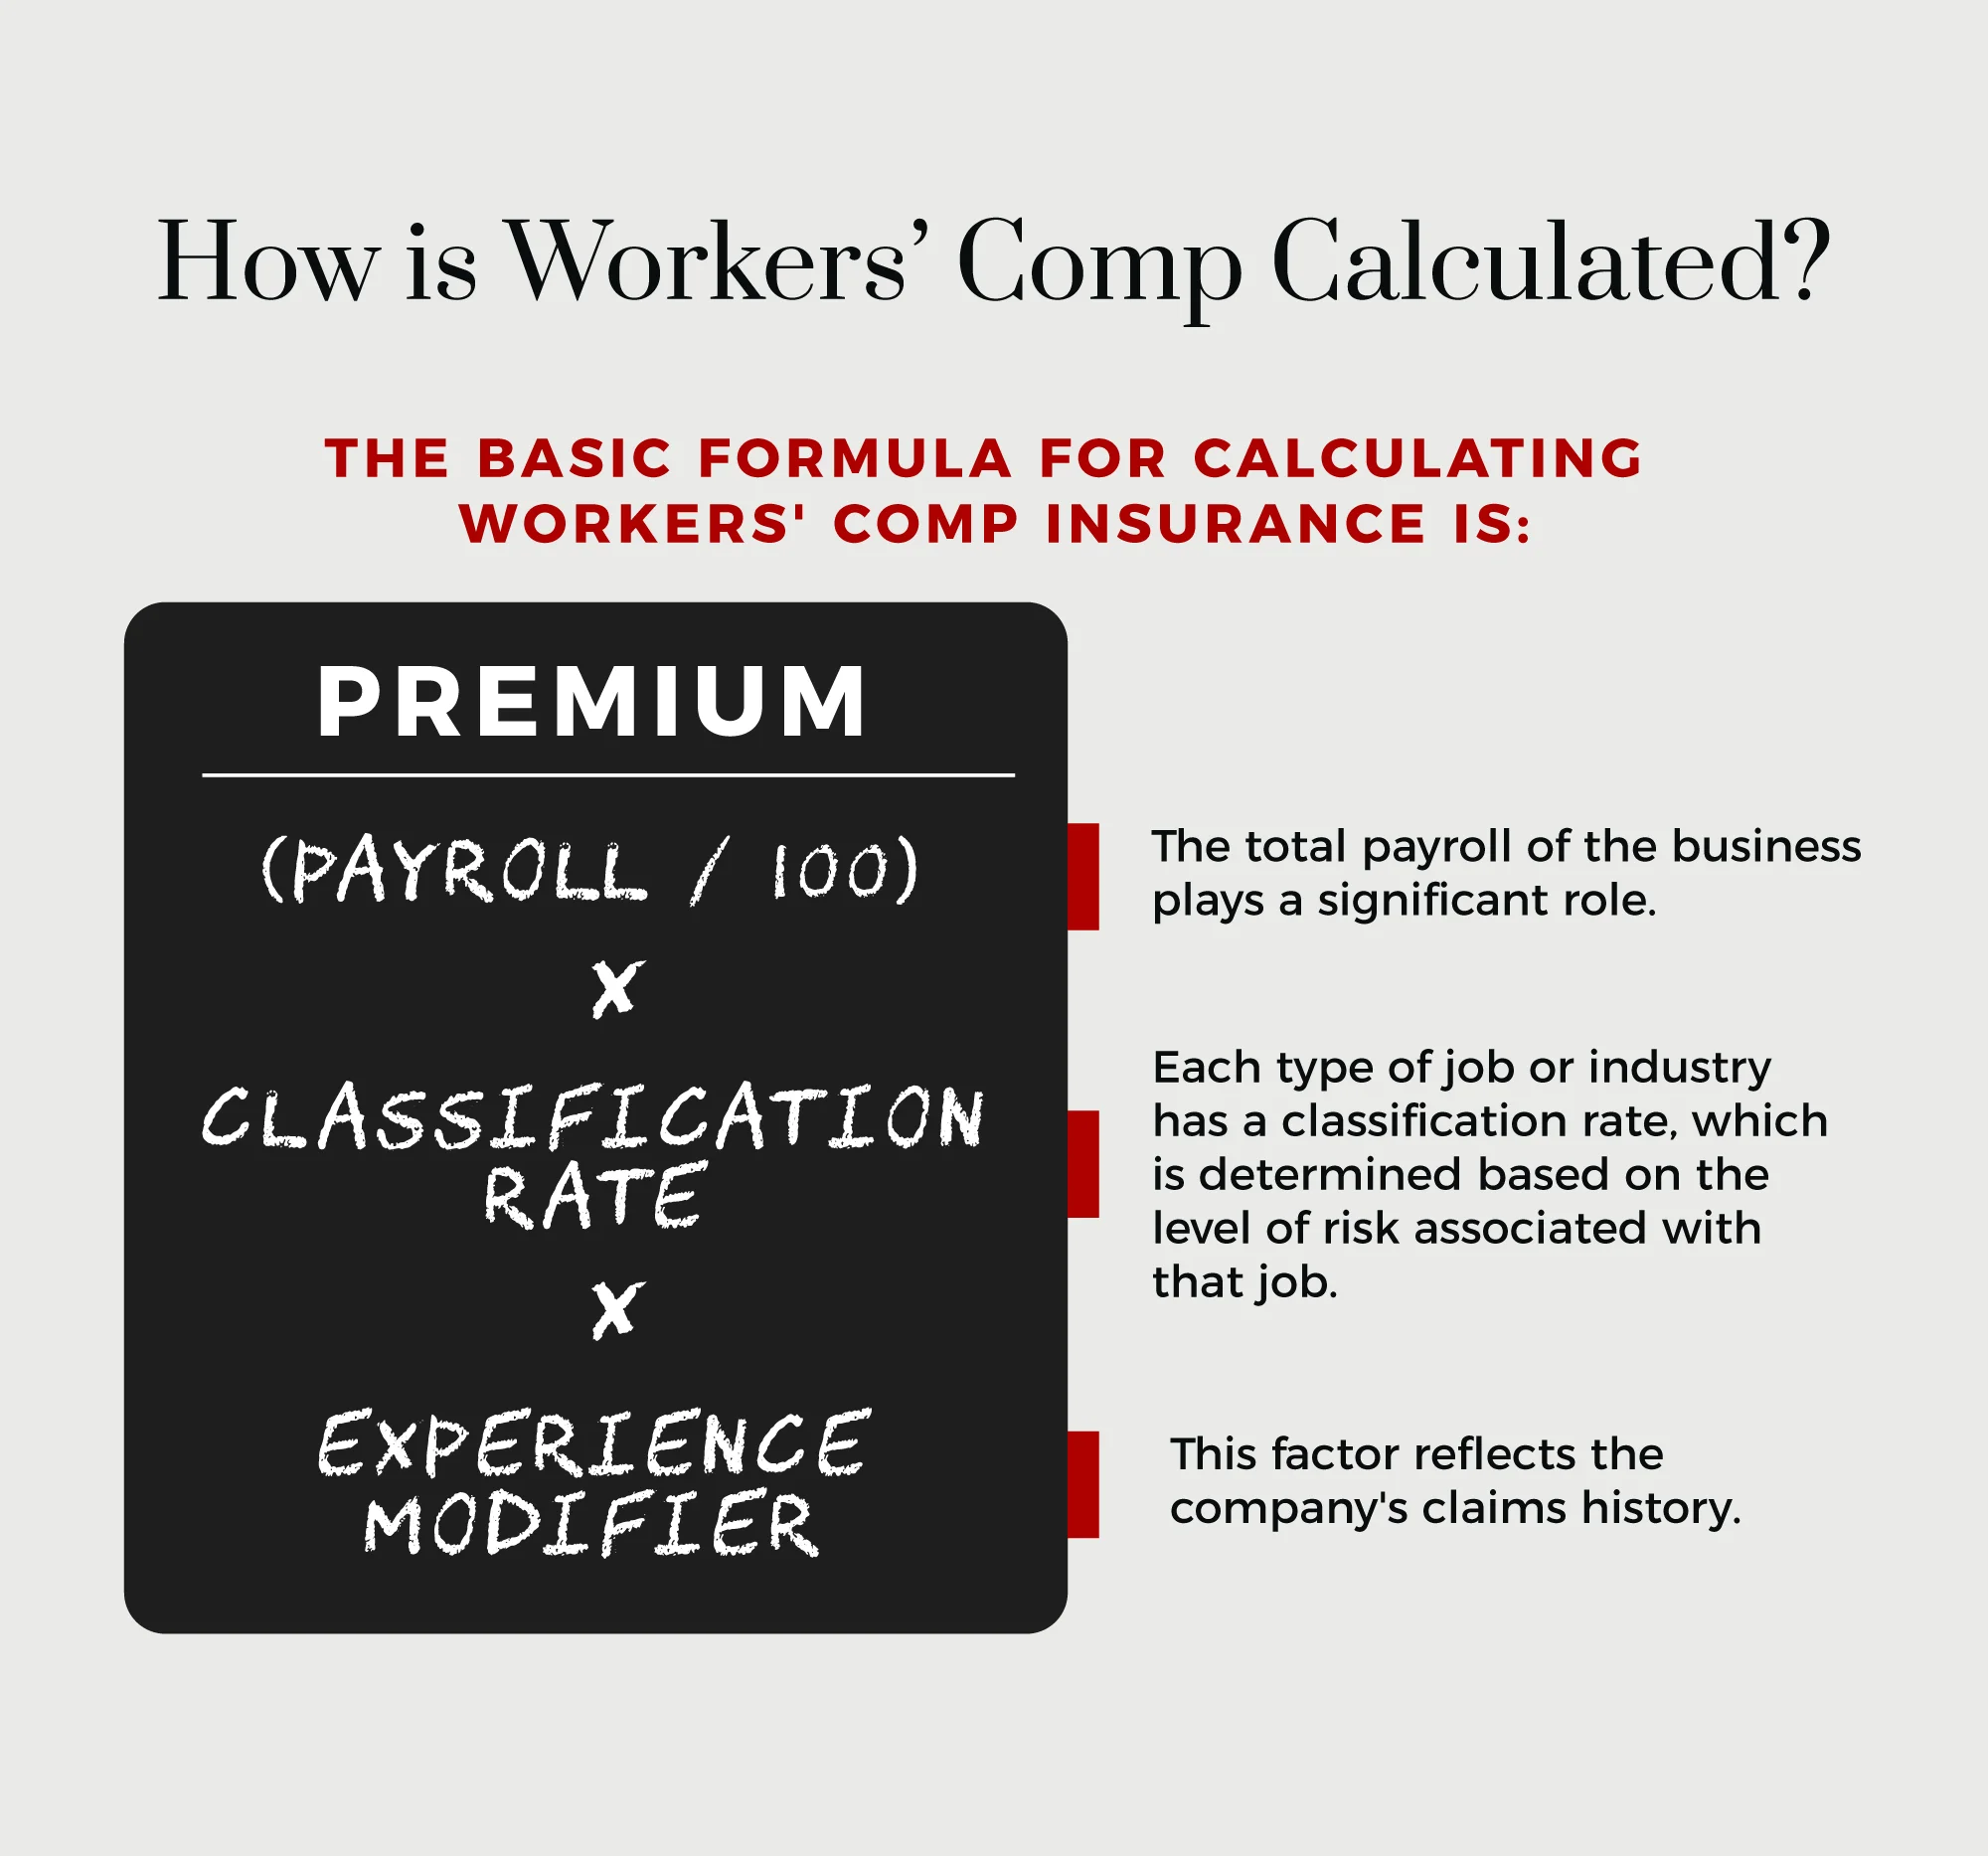 how is workers' comp calculated?